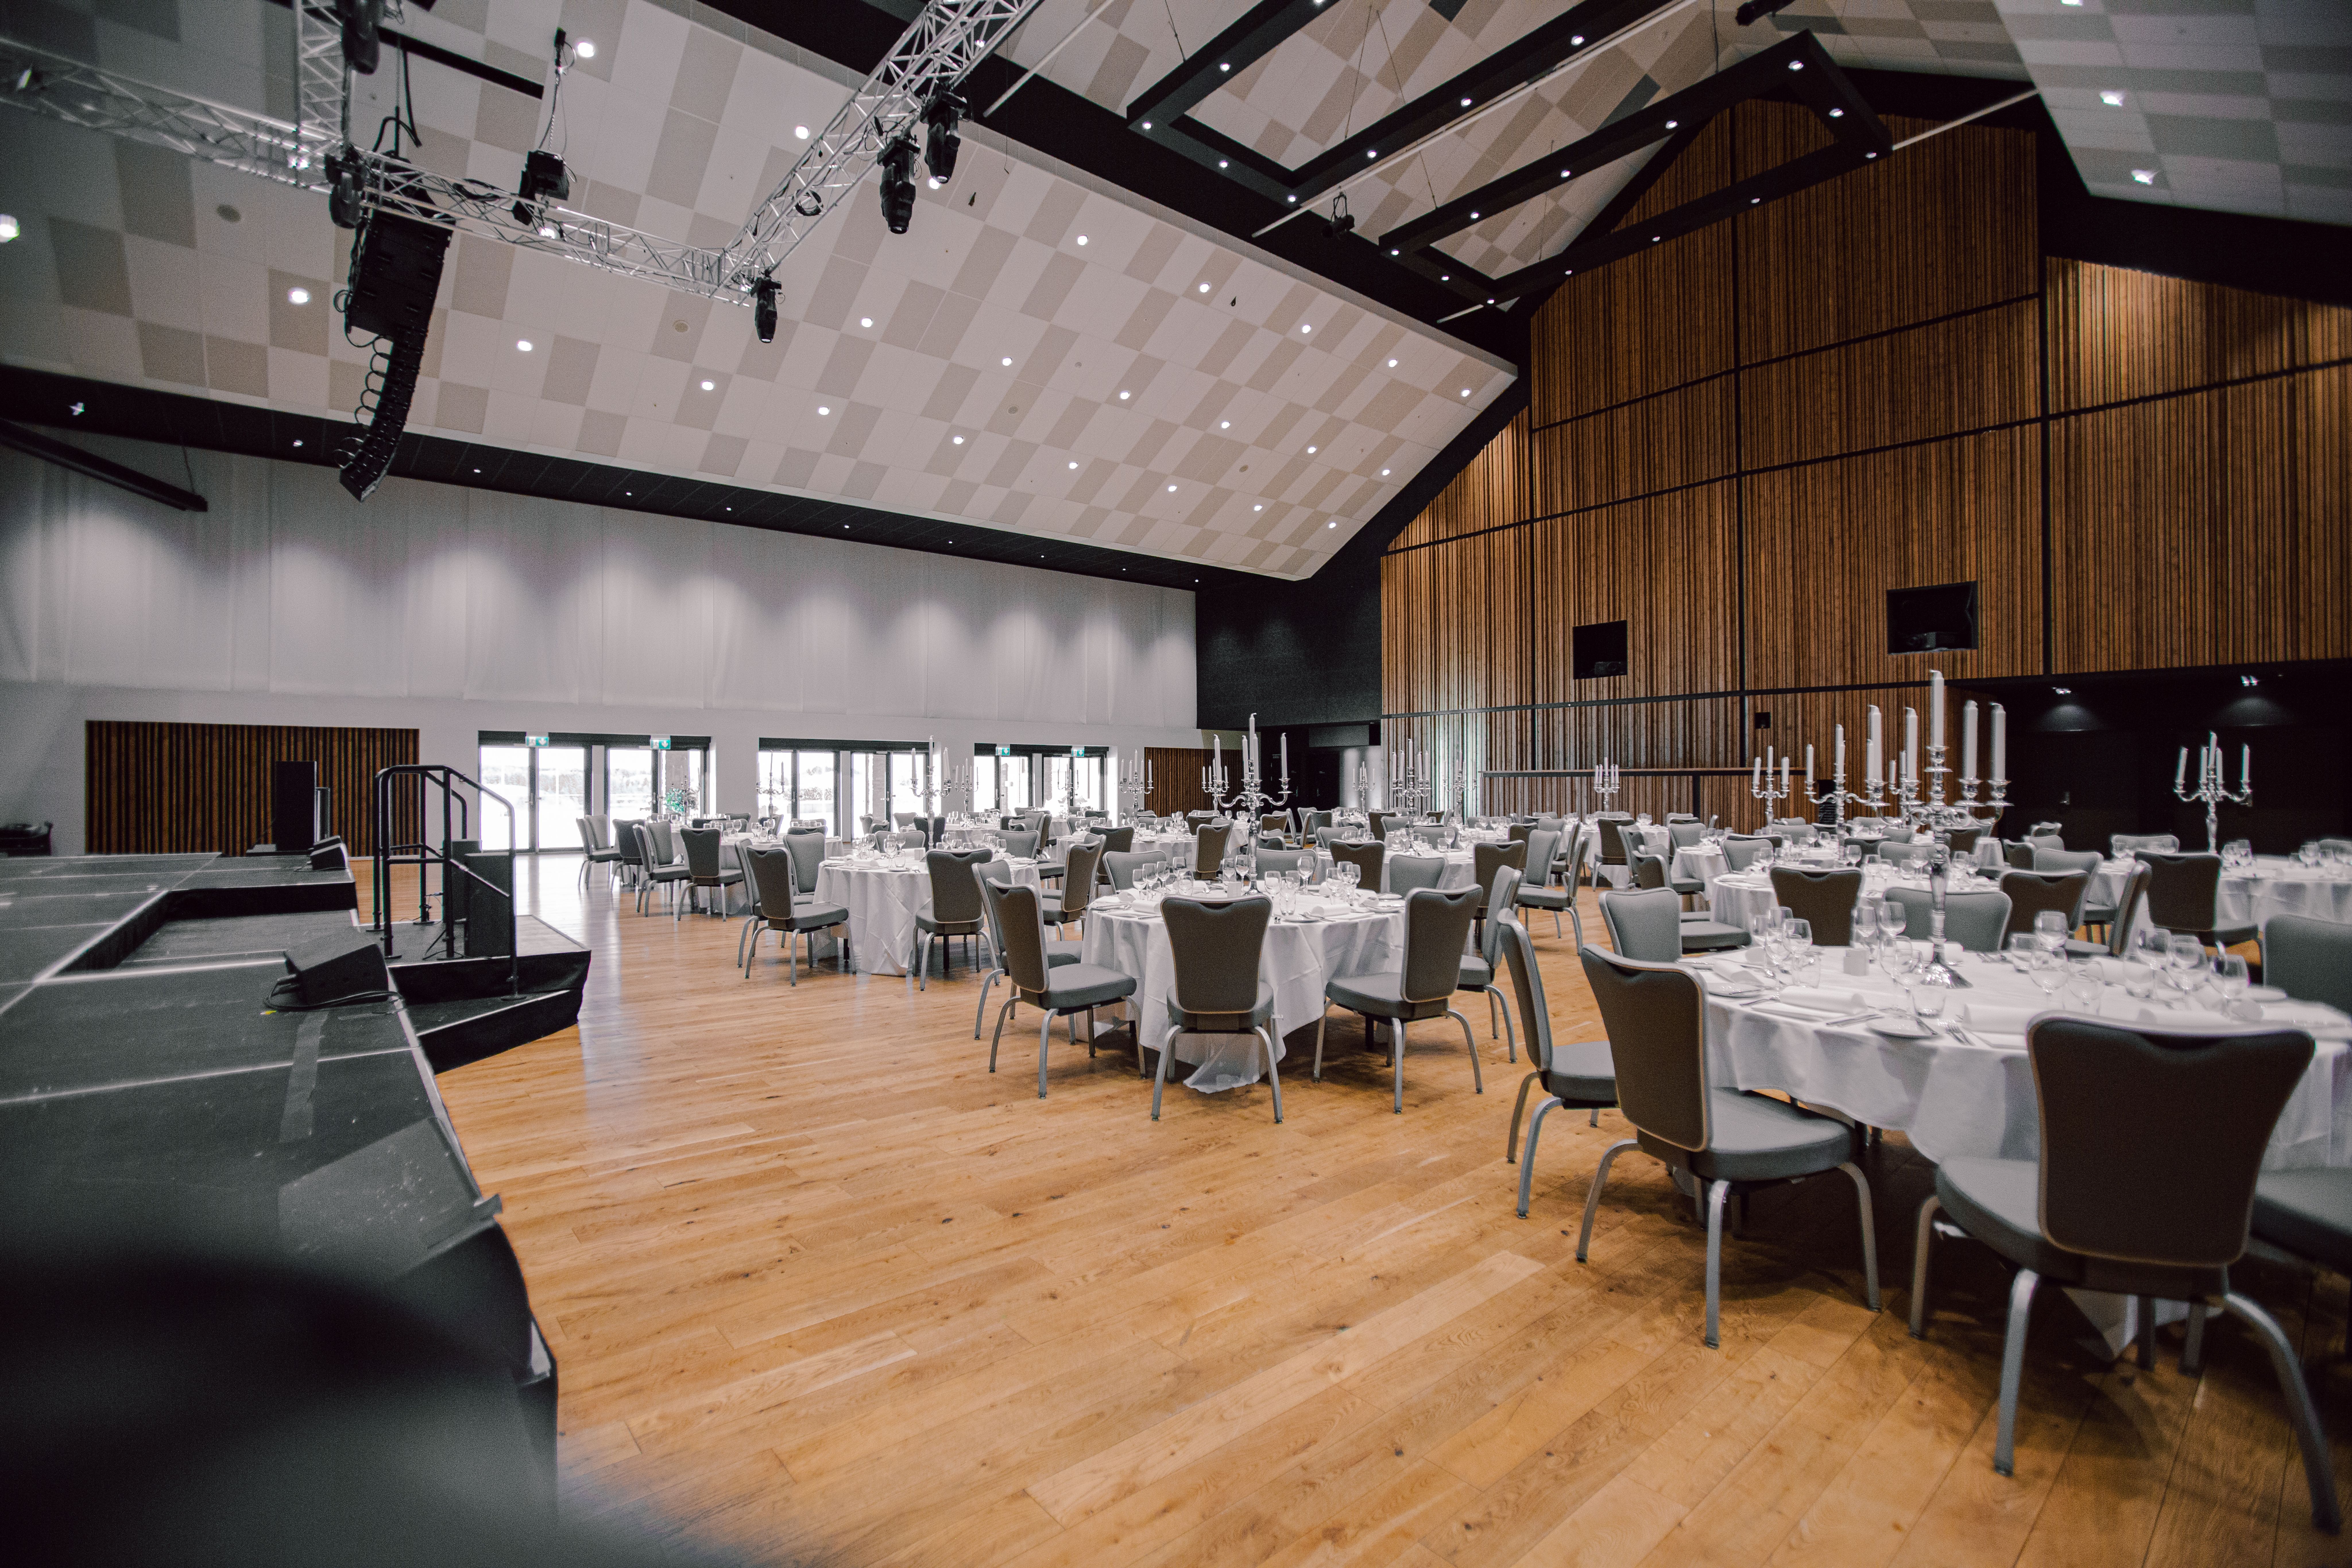 The panoramic hall is suitable as a concert venue, banquet dinner and meeting room.